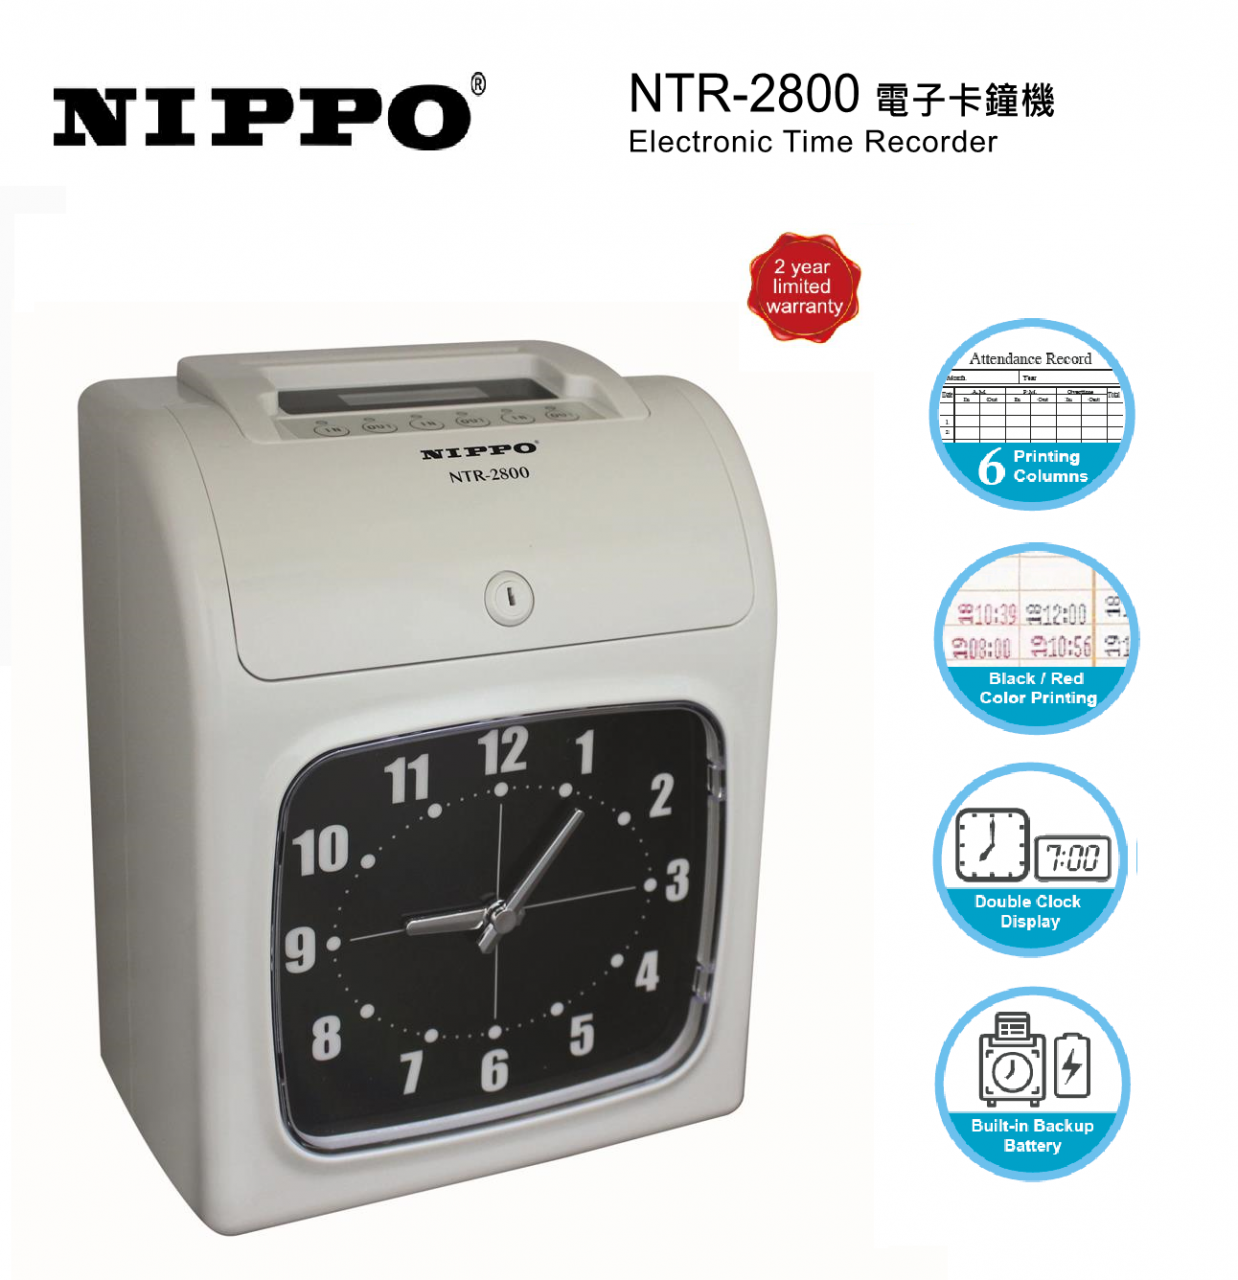 NIPPO NTR-2800 Electronic Time Recorder - WAH CHIT